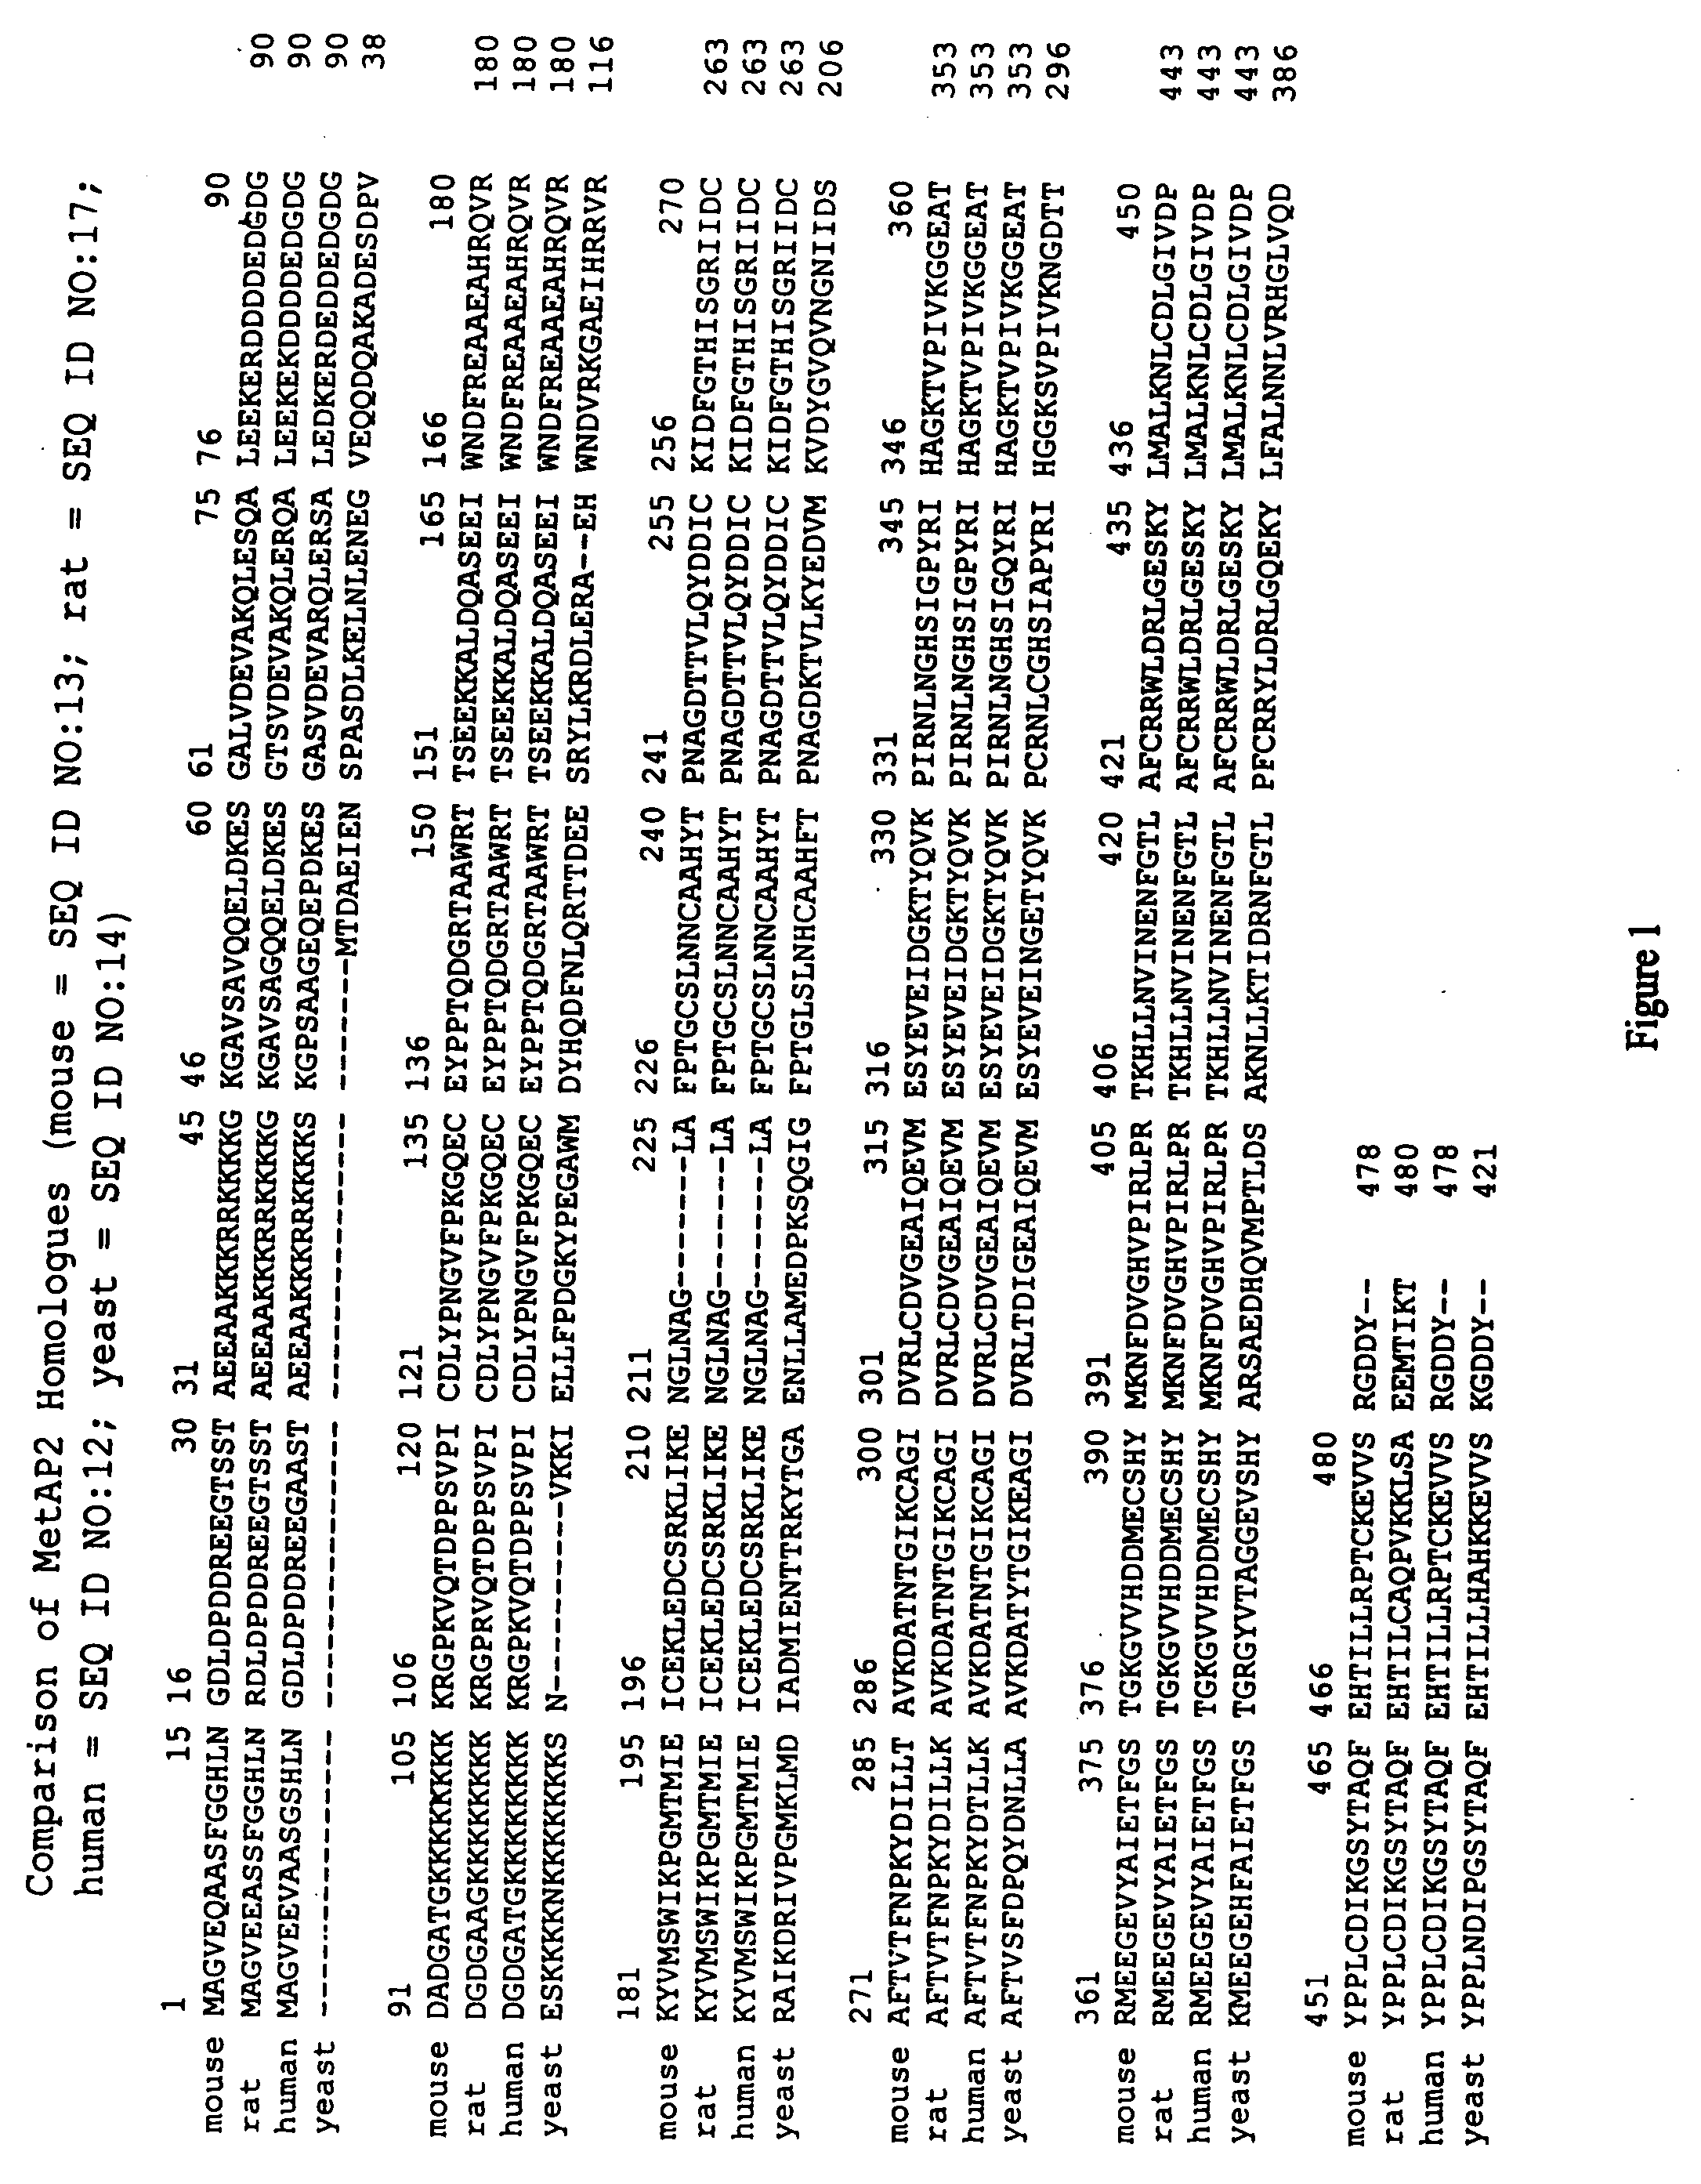 Dominant negative variants of methionine aminopeptidase 2 (MetAP2) and clinical uses thereof